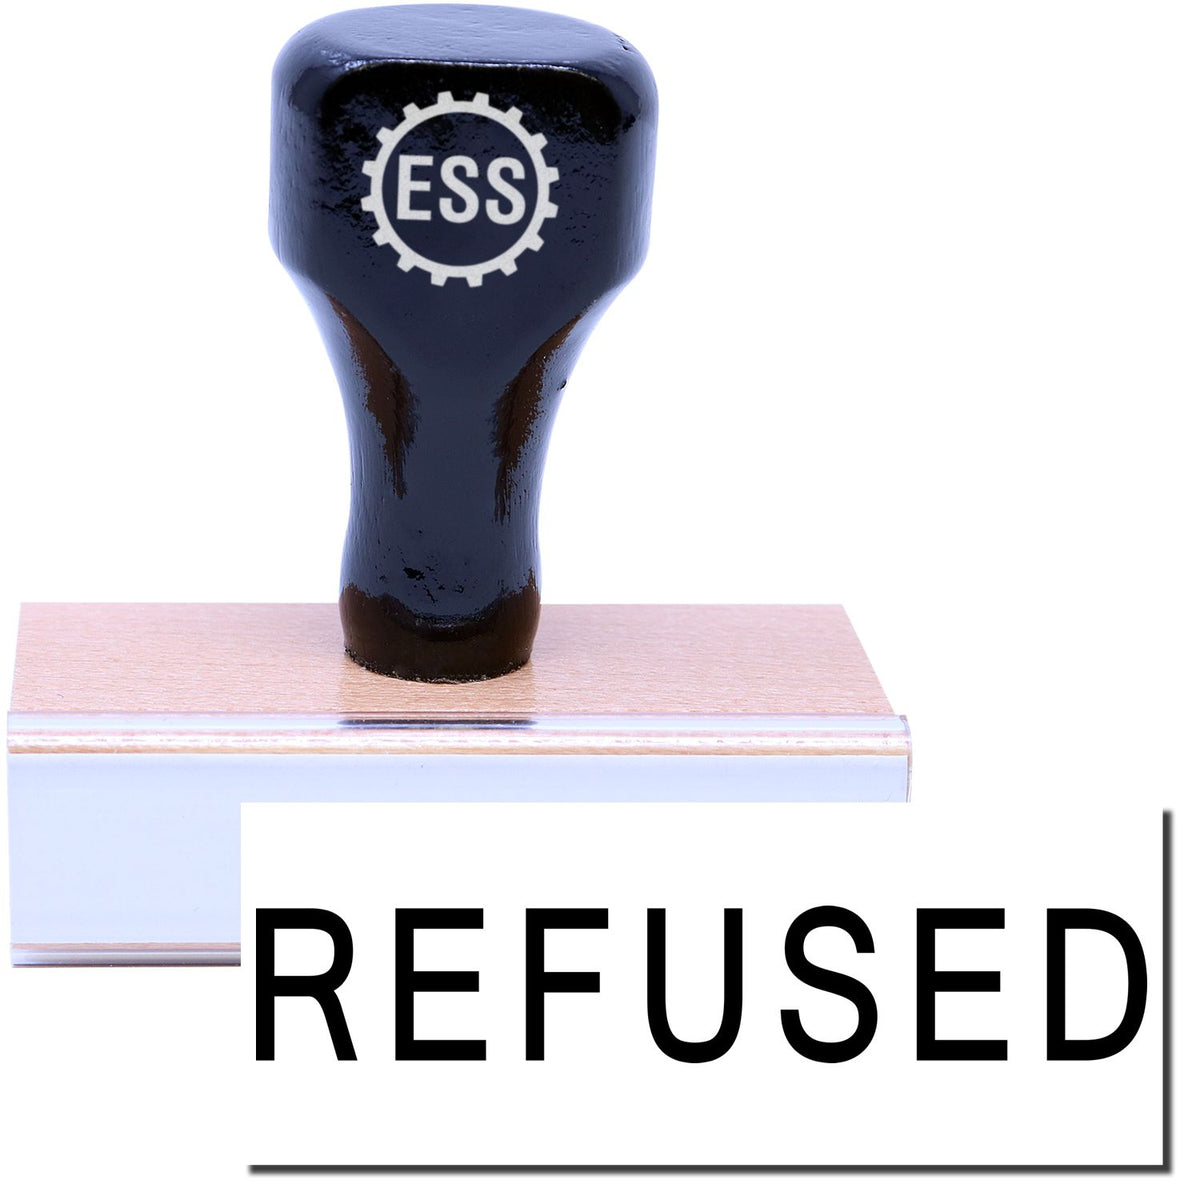 A stock office rubber stamp with a stamped image showing how the text &quot;REFUSED&quot; in a large font is displayed after stamping.